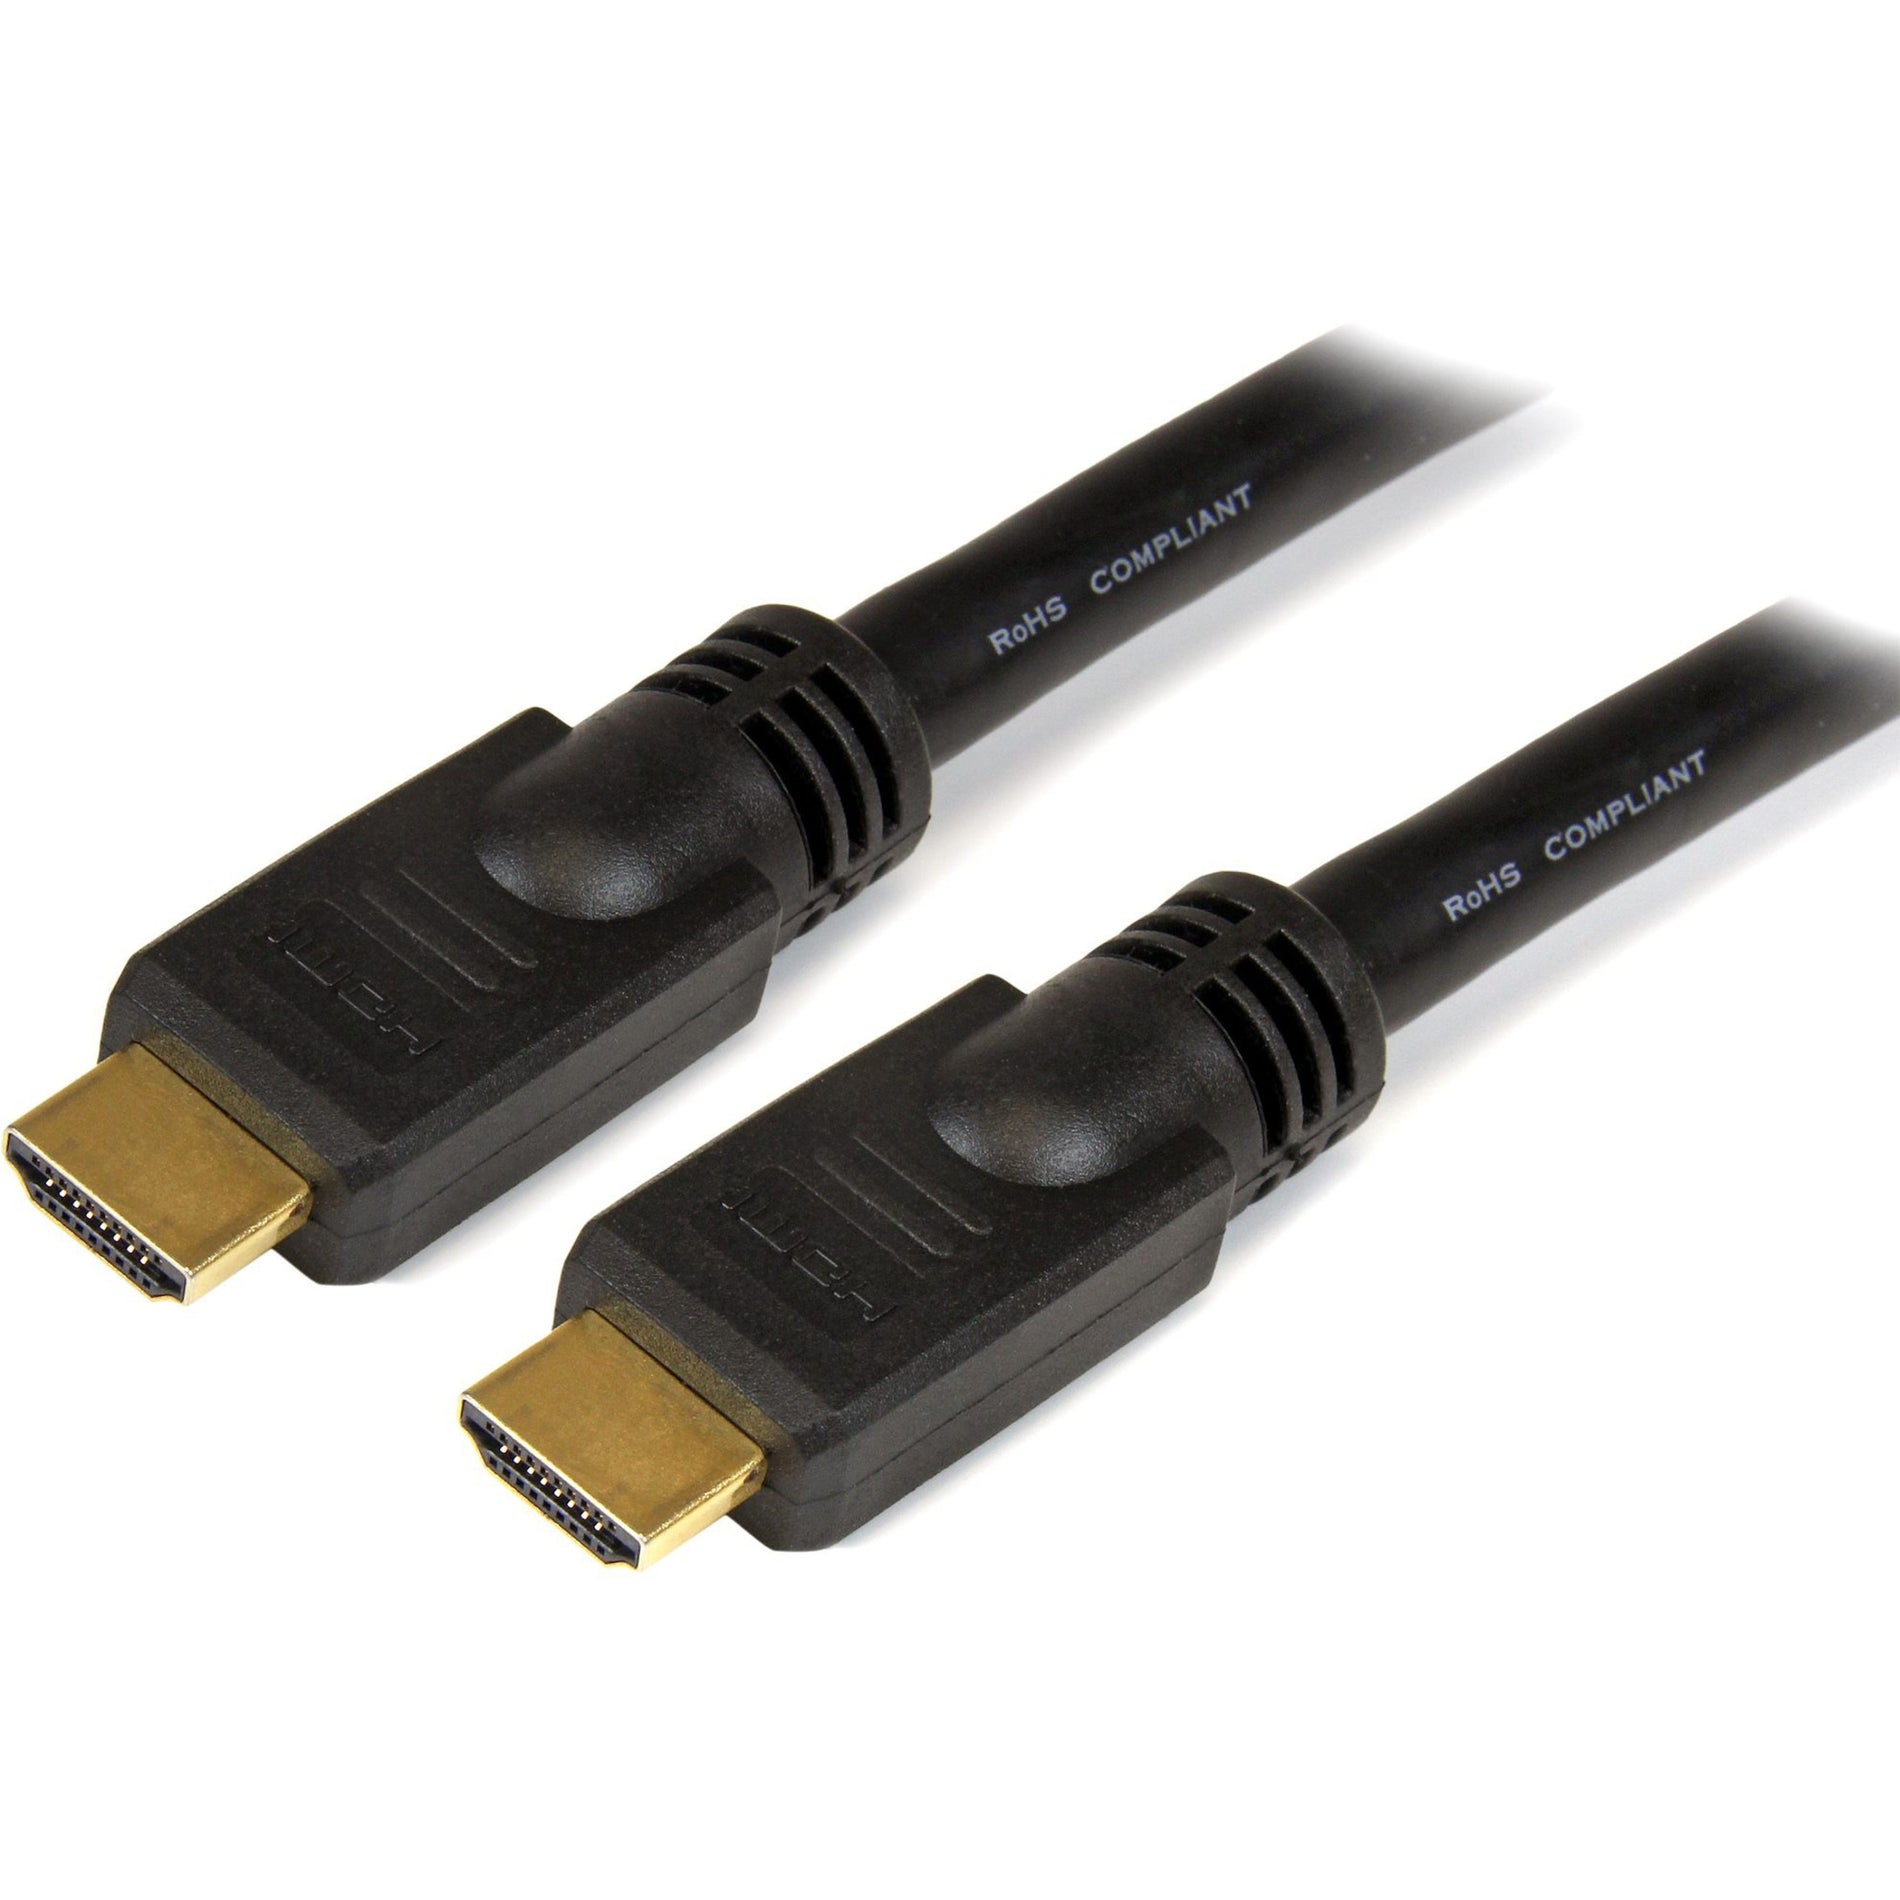 StarTech.com HDMM35 35 ft High Speed HDMI Cable - Ultra HD 4k x 2k HDMI Cable, Molded, Corrosion-free, Strain Relief, Gold Plated Connectors, Black